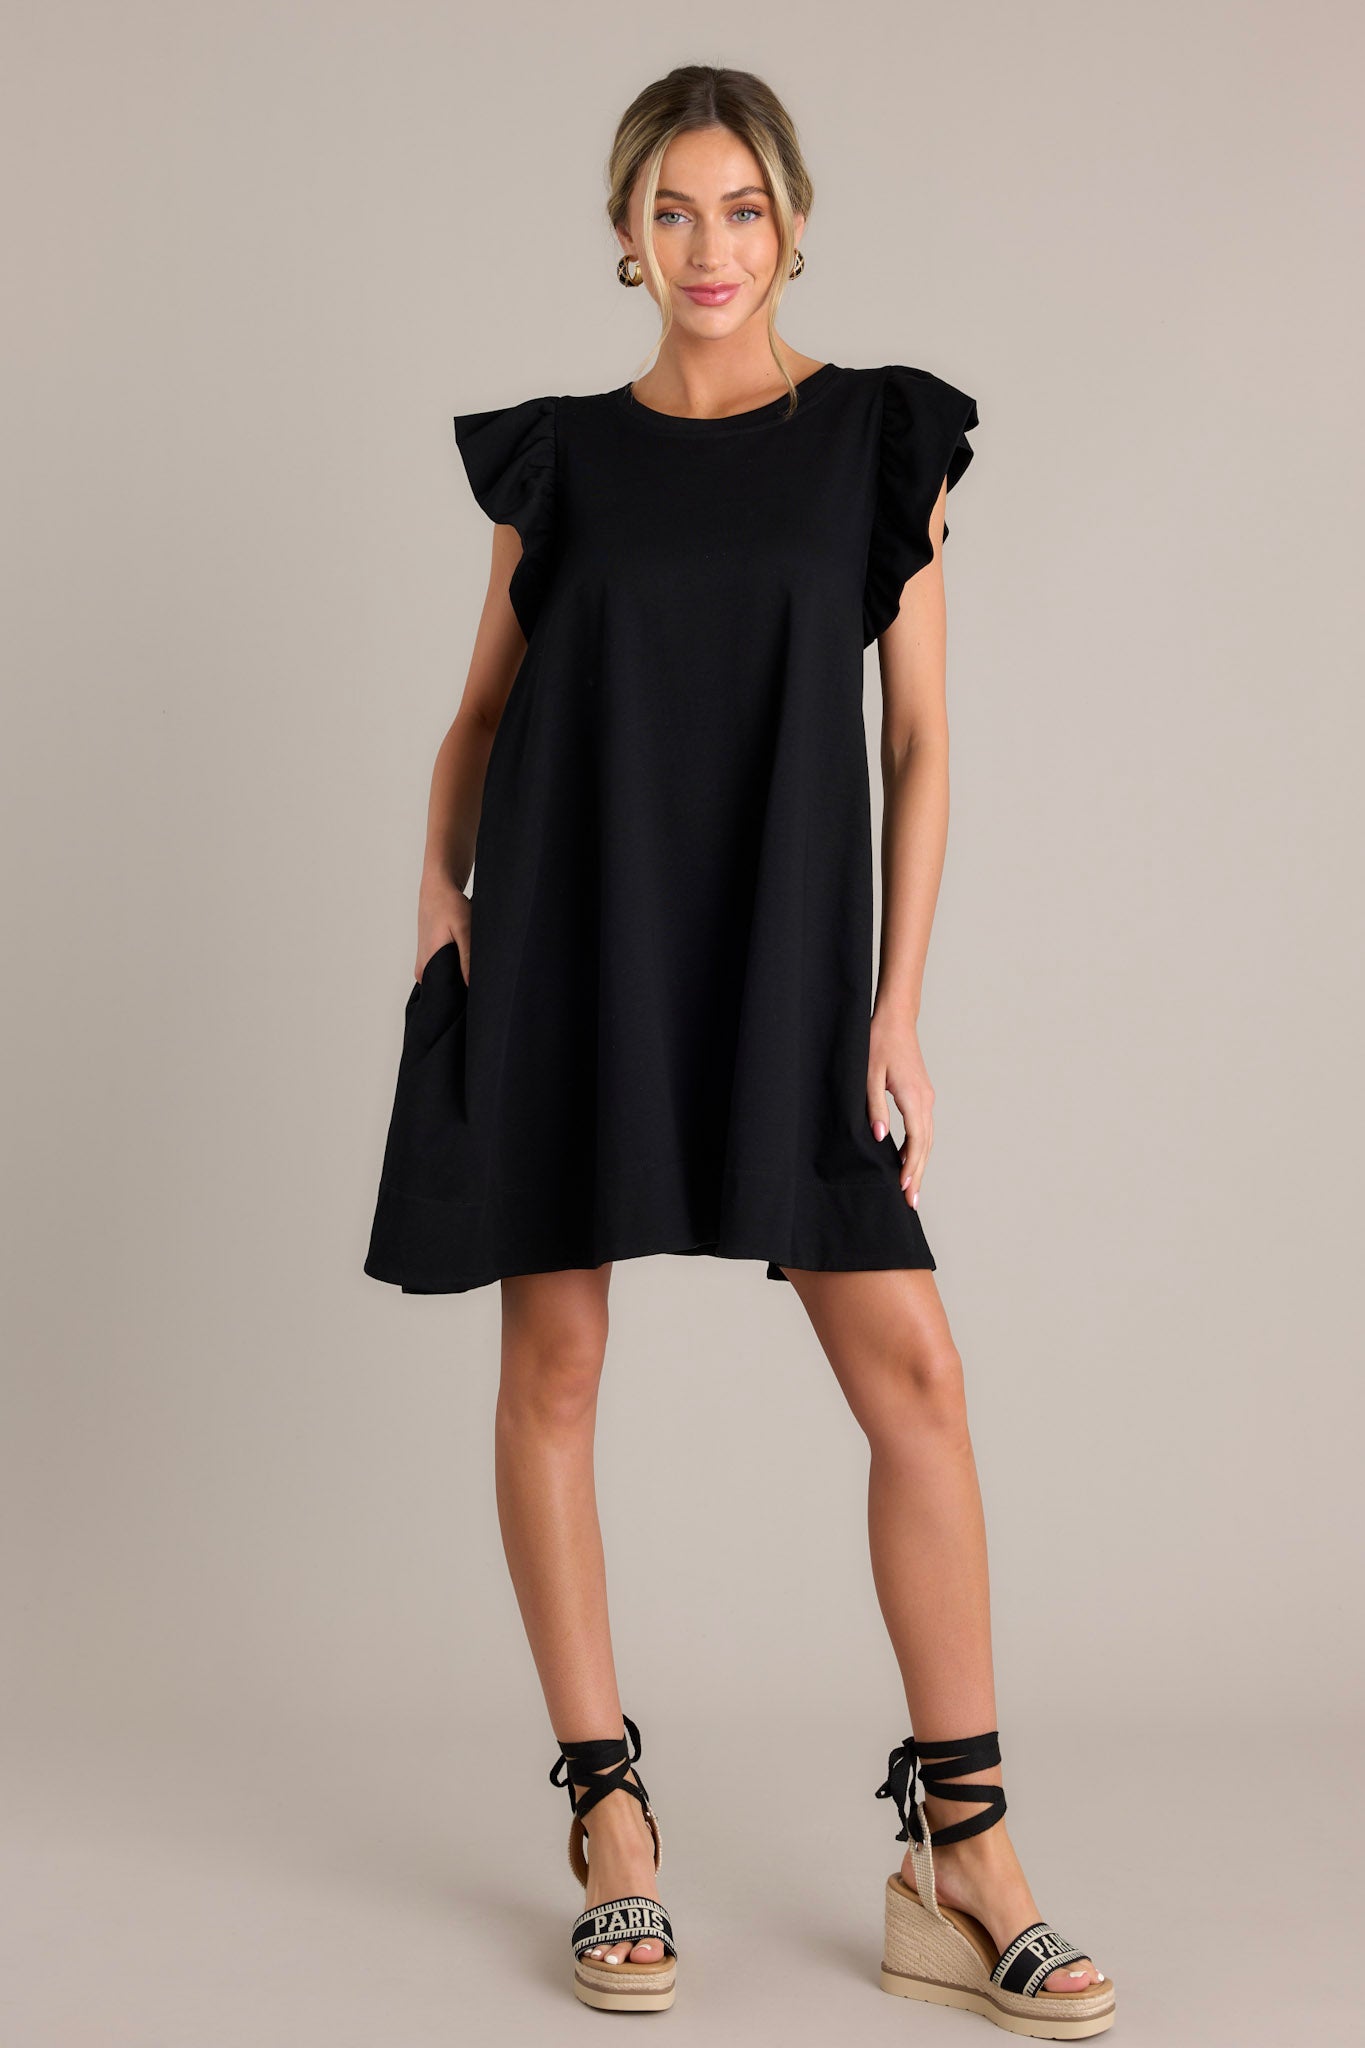 This black mini dress features a crew neckline, a self-tie drawstring waist feature in the back of the dress, functional hip pockets, and ruffled short sleeves.